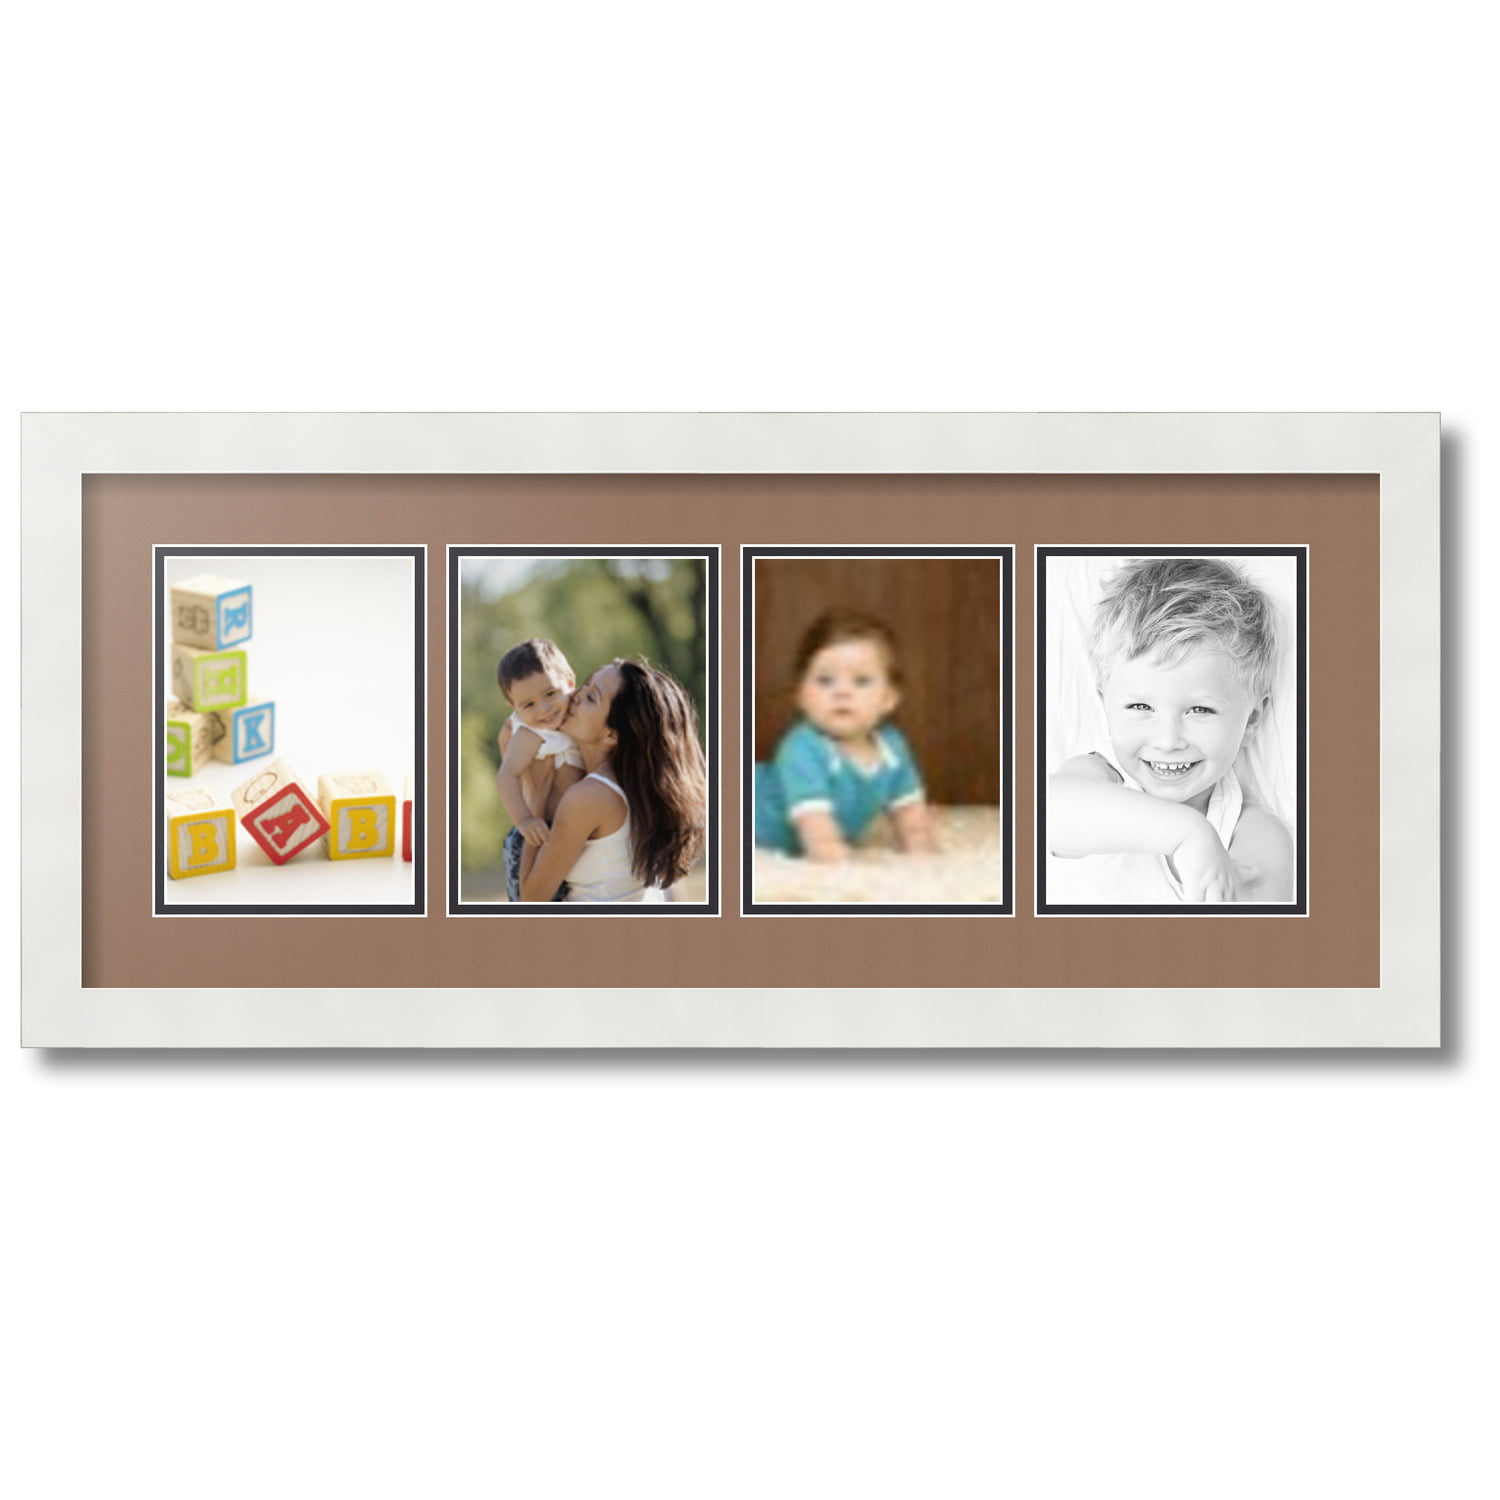 Details about   Rustic Wood Photo Frames 4 Set of 2 Collage Hanging Picture 5x7 Vintage White 